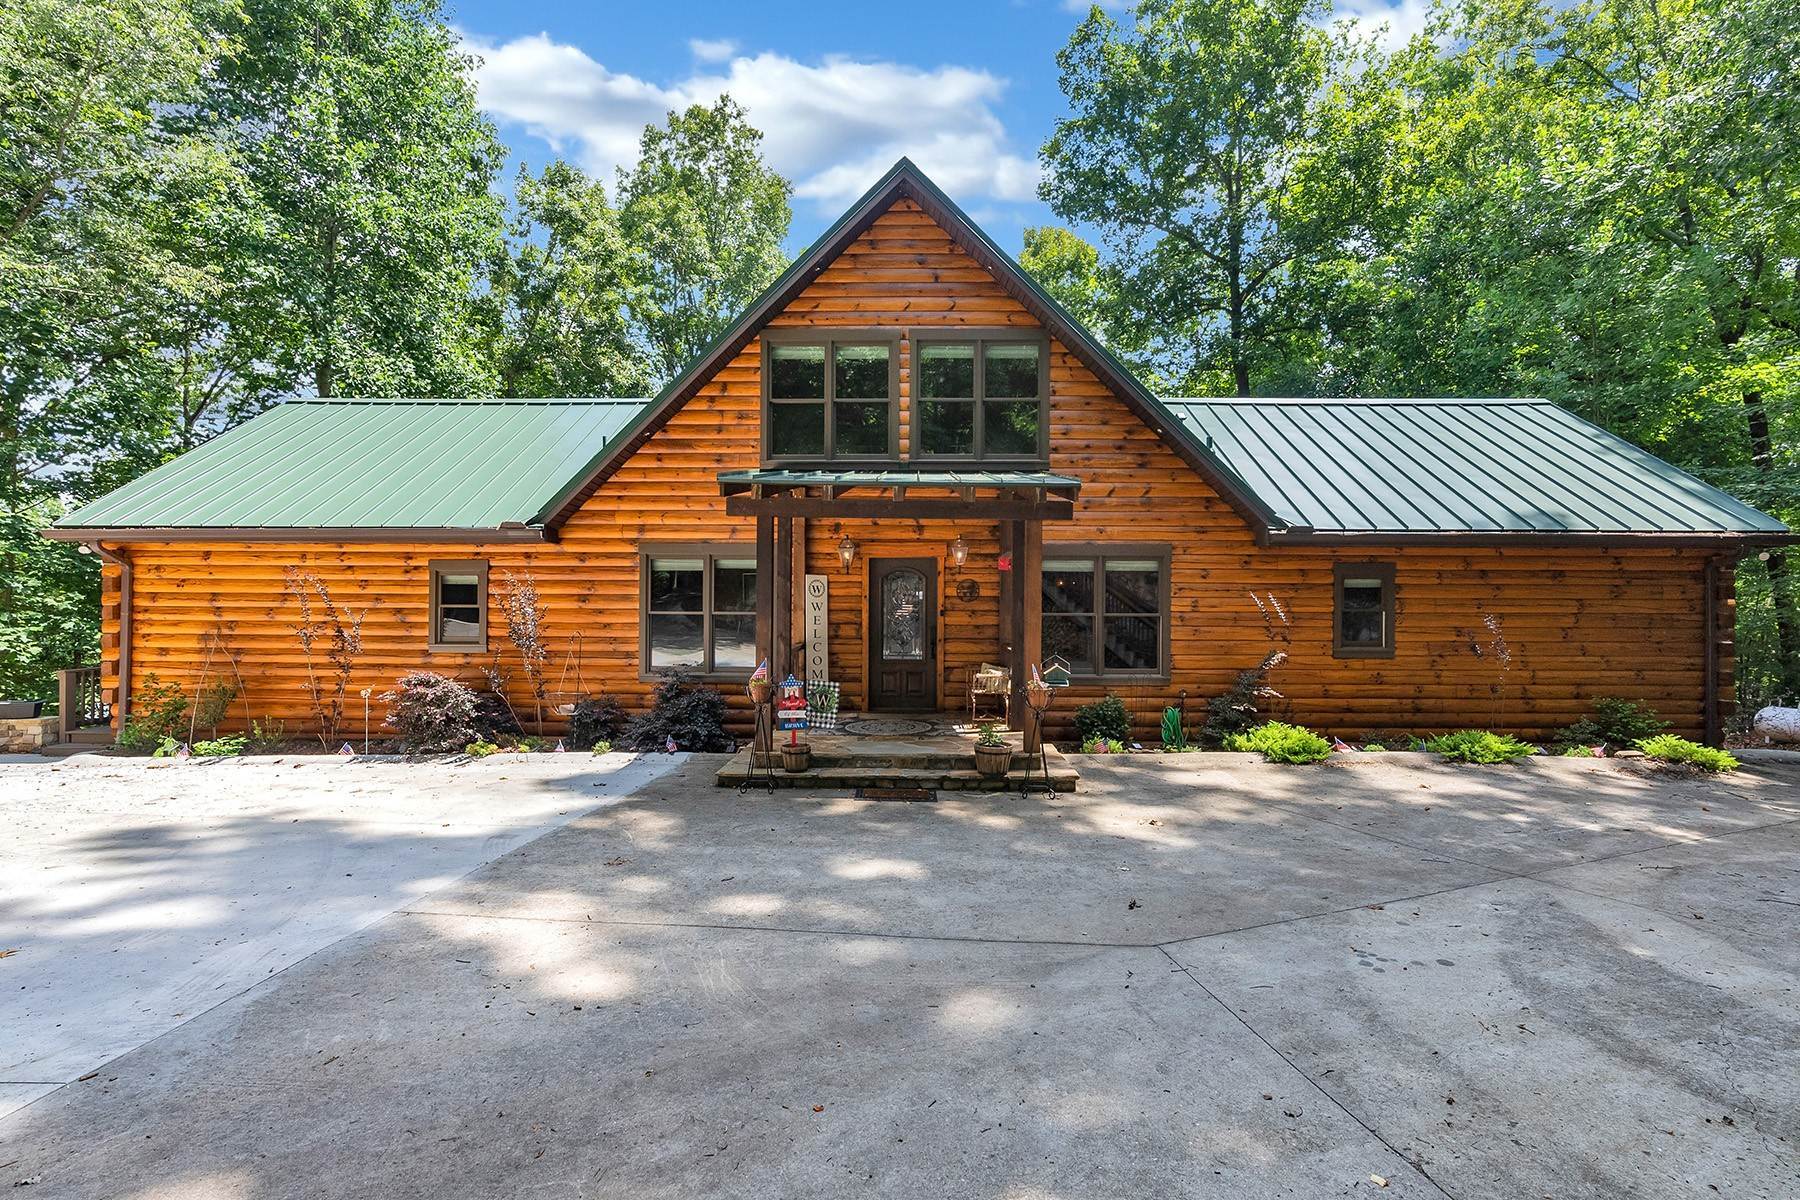 Single Family Homes for Sale at Welcome To This Exquisite Lakefront Log Cabin That Boasts Rustic Charm 5281 Laurel Lane Gainesville, Georgia 30506 United States